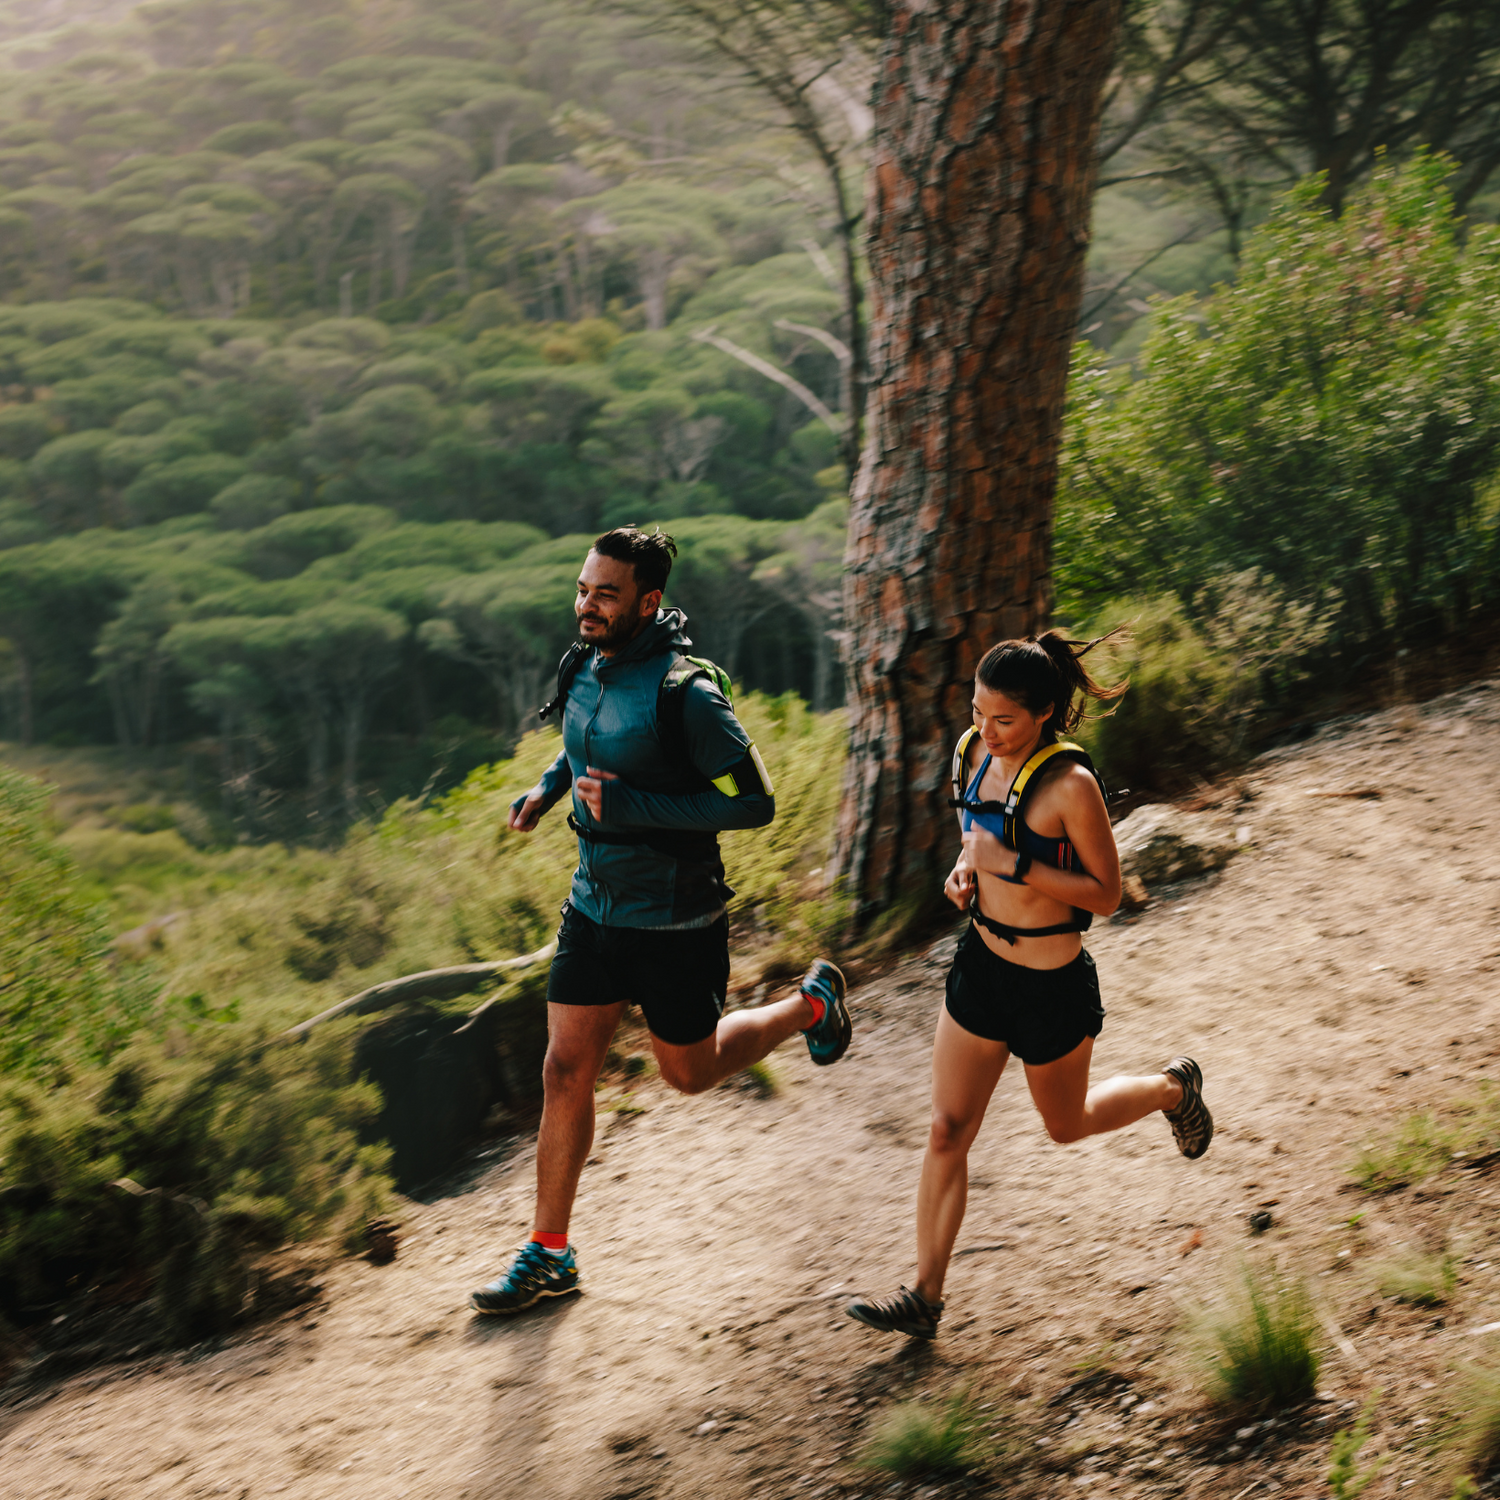 Male and female runners jogging on scenic outdoor trail surrounded by trees and nature.